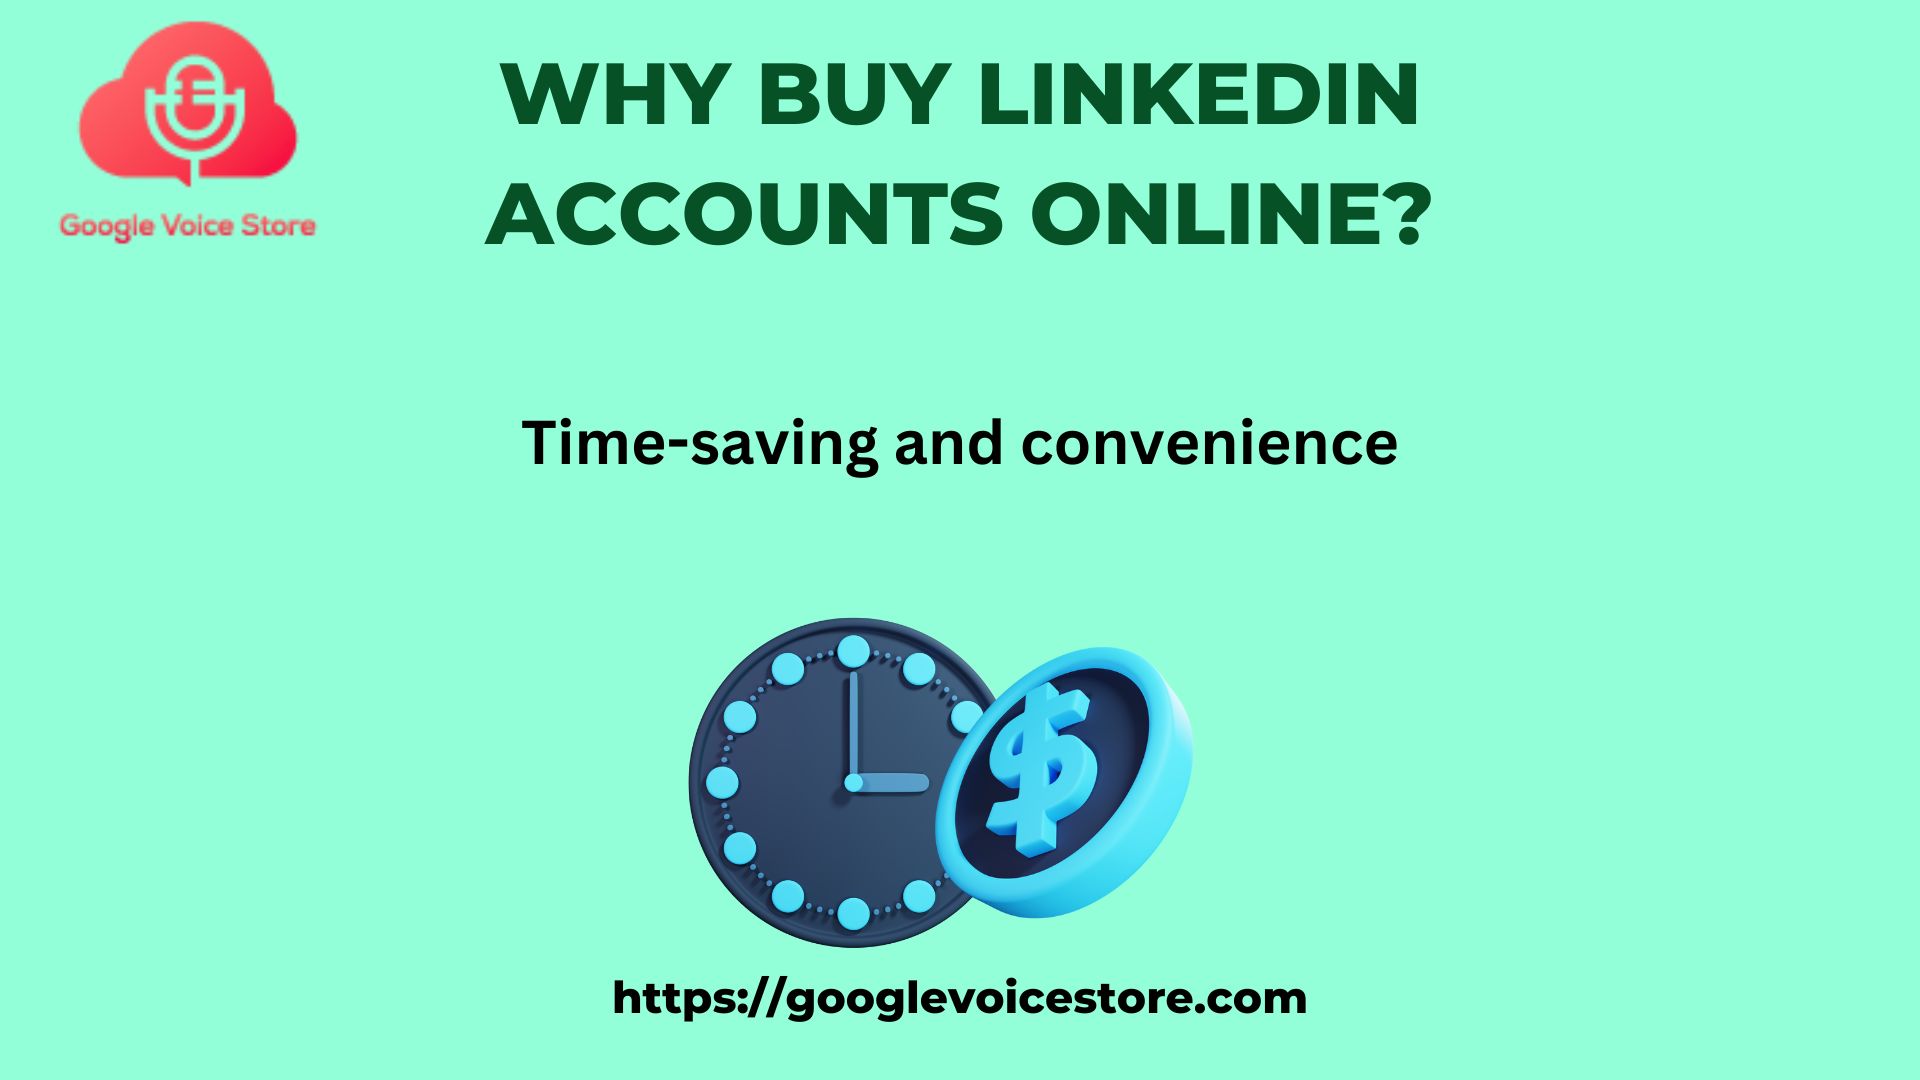 Buy LinkedIn Accounts Online: The What, Why, and How